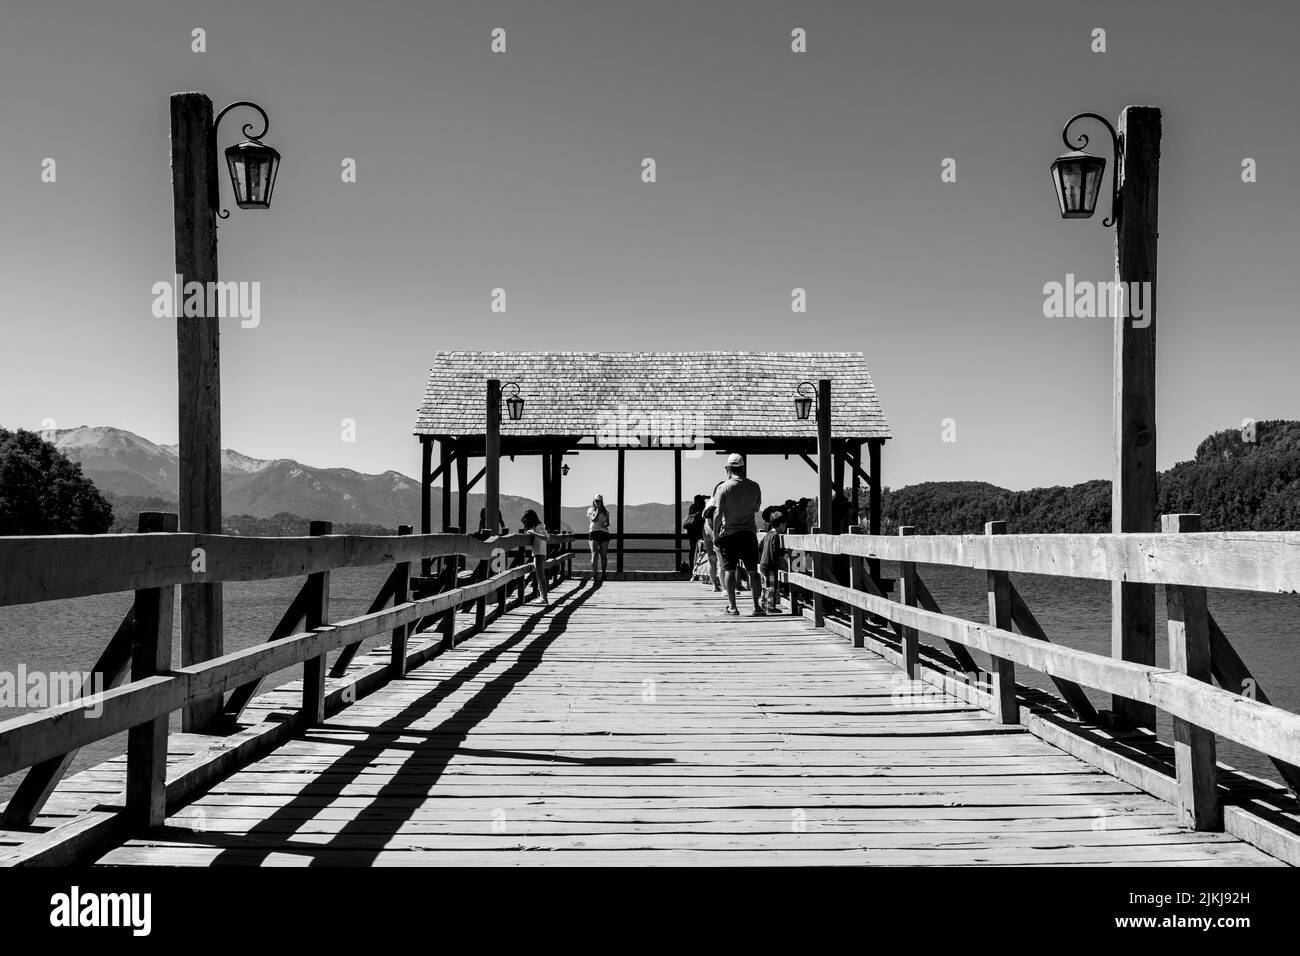 A grayscale shot of tourists on a wooden coast platform during summertime Stock Photo